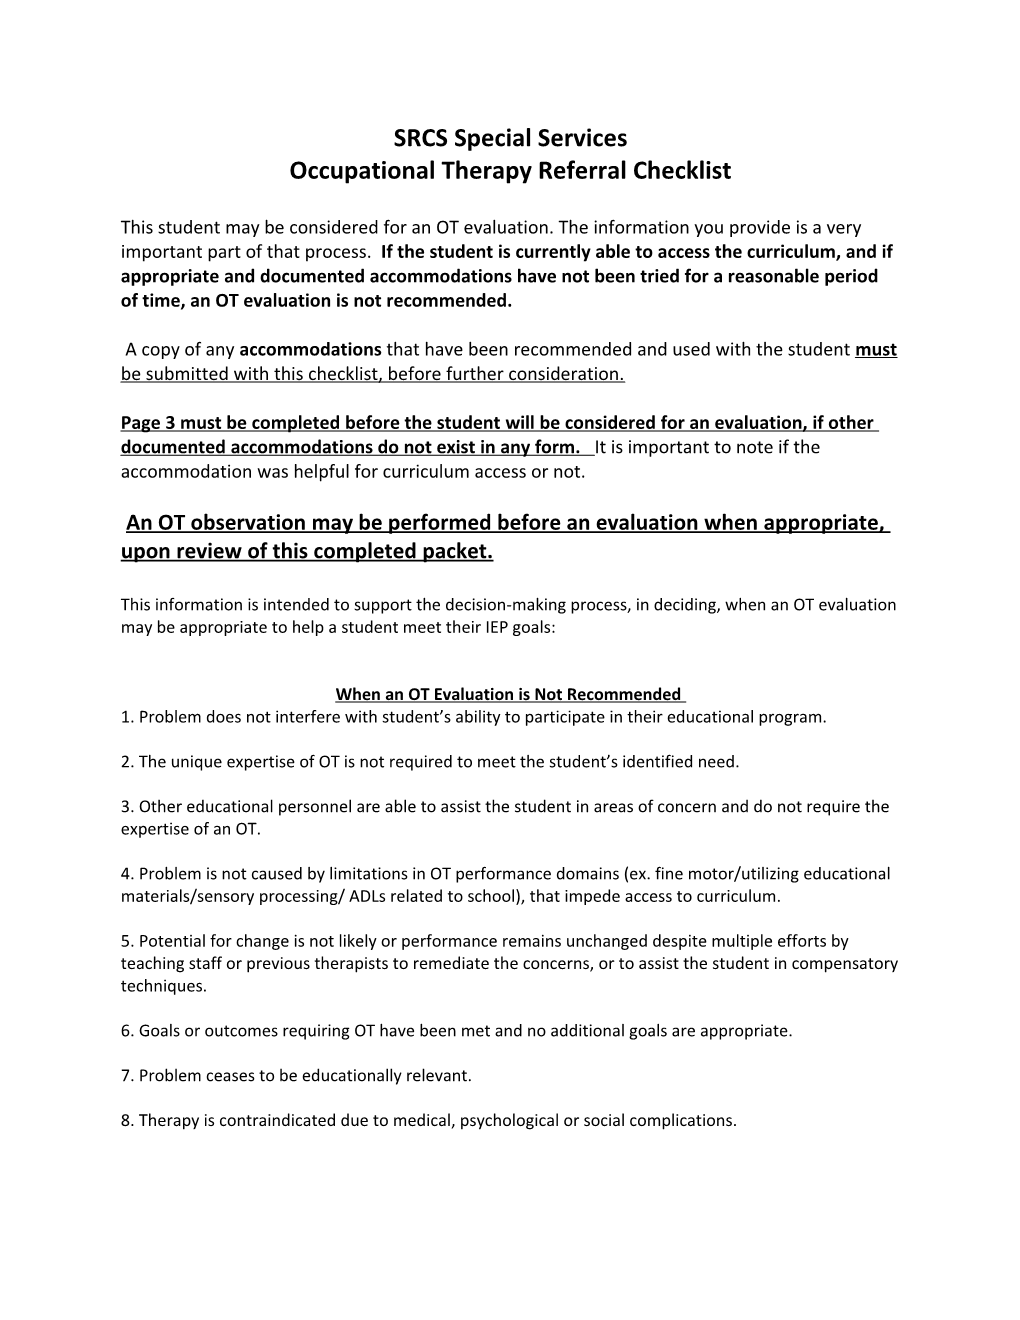 Occupational Therapy Referral Checklist